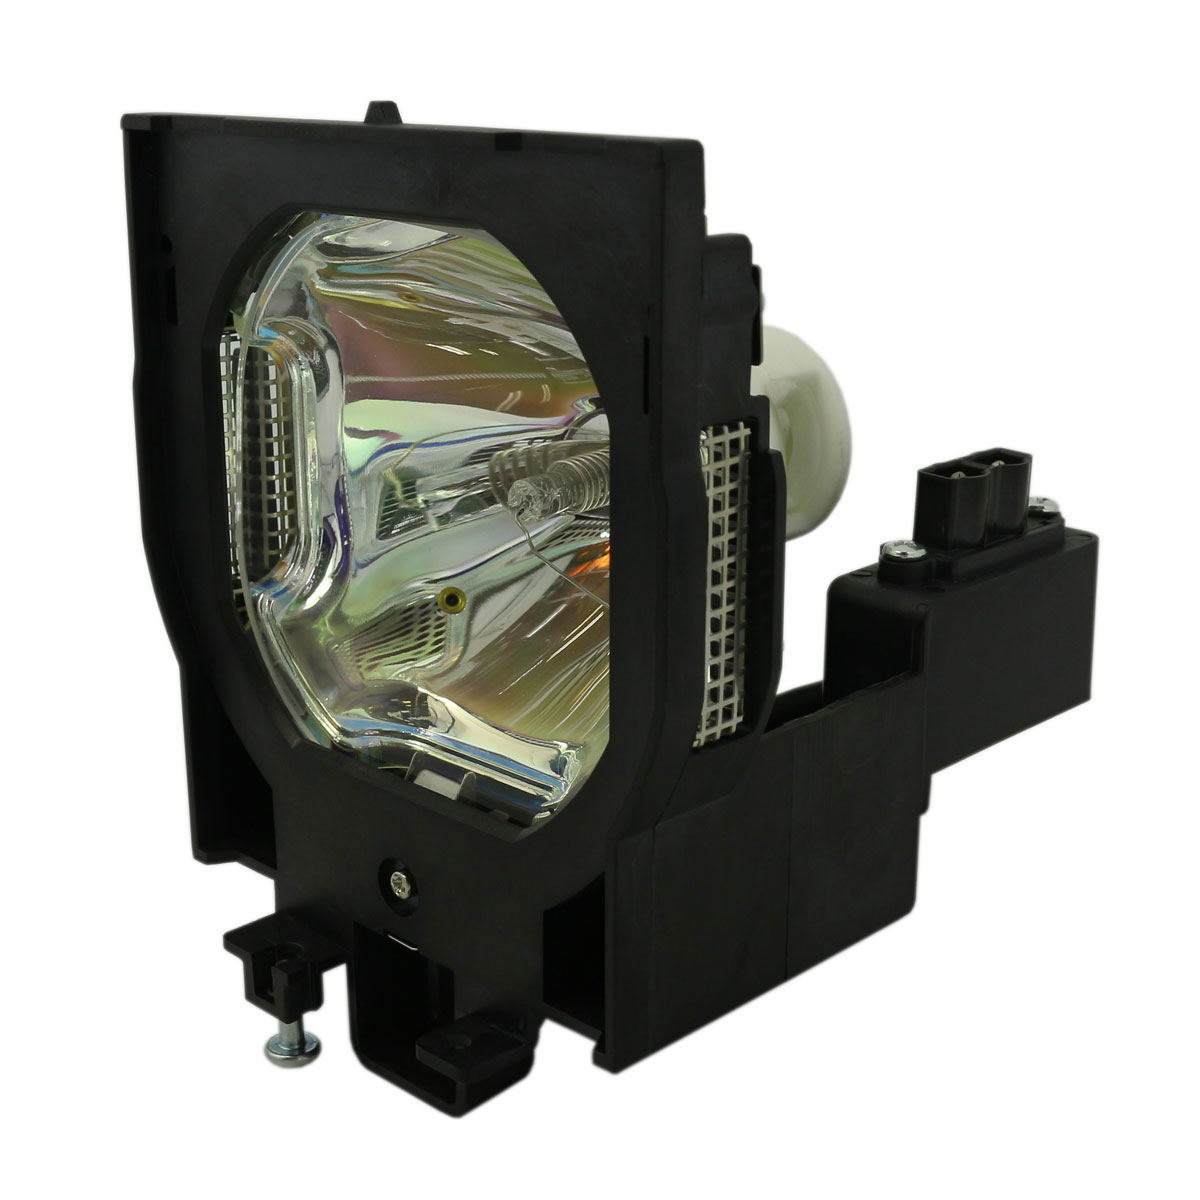 Buyquest LX100  OEM Replacement Projector Lamp for Christie. Includes New Philips UHP 250W Bulb and Housing